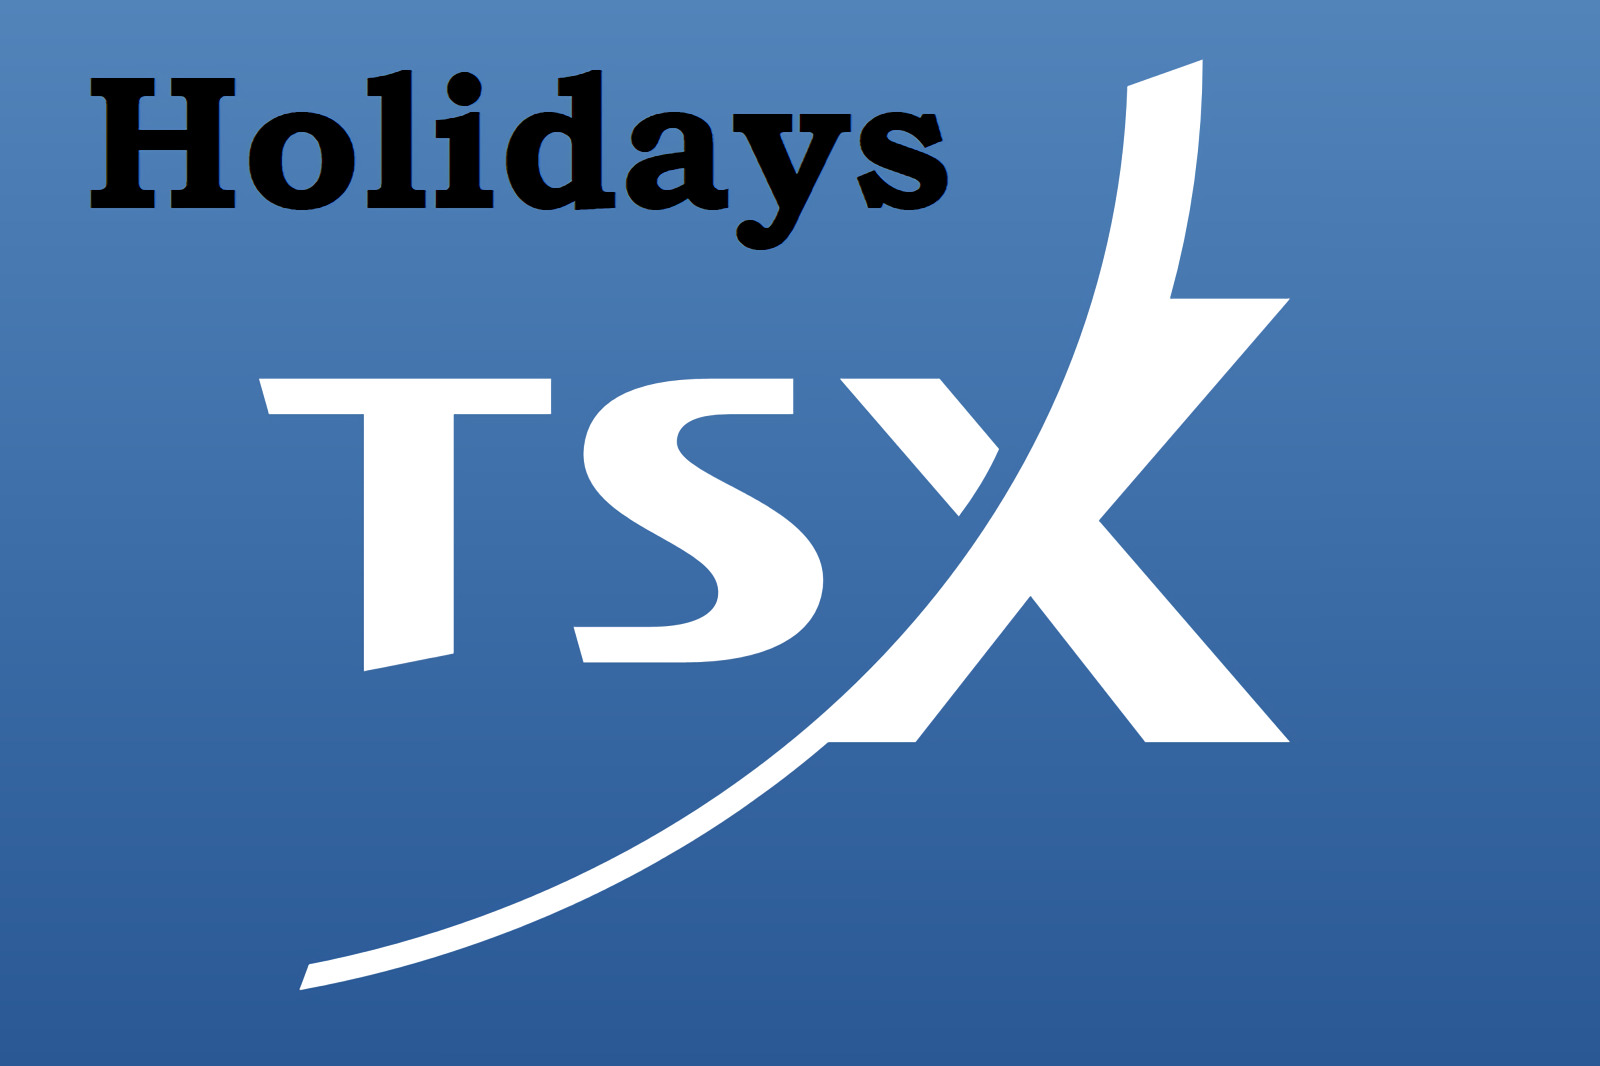 xtsx trading holidays in 2023